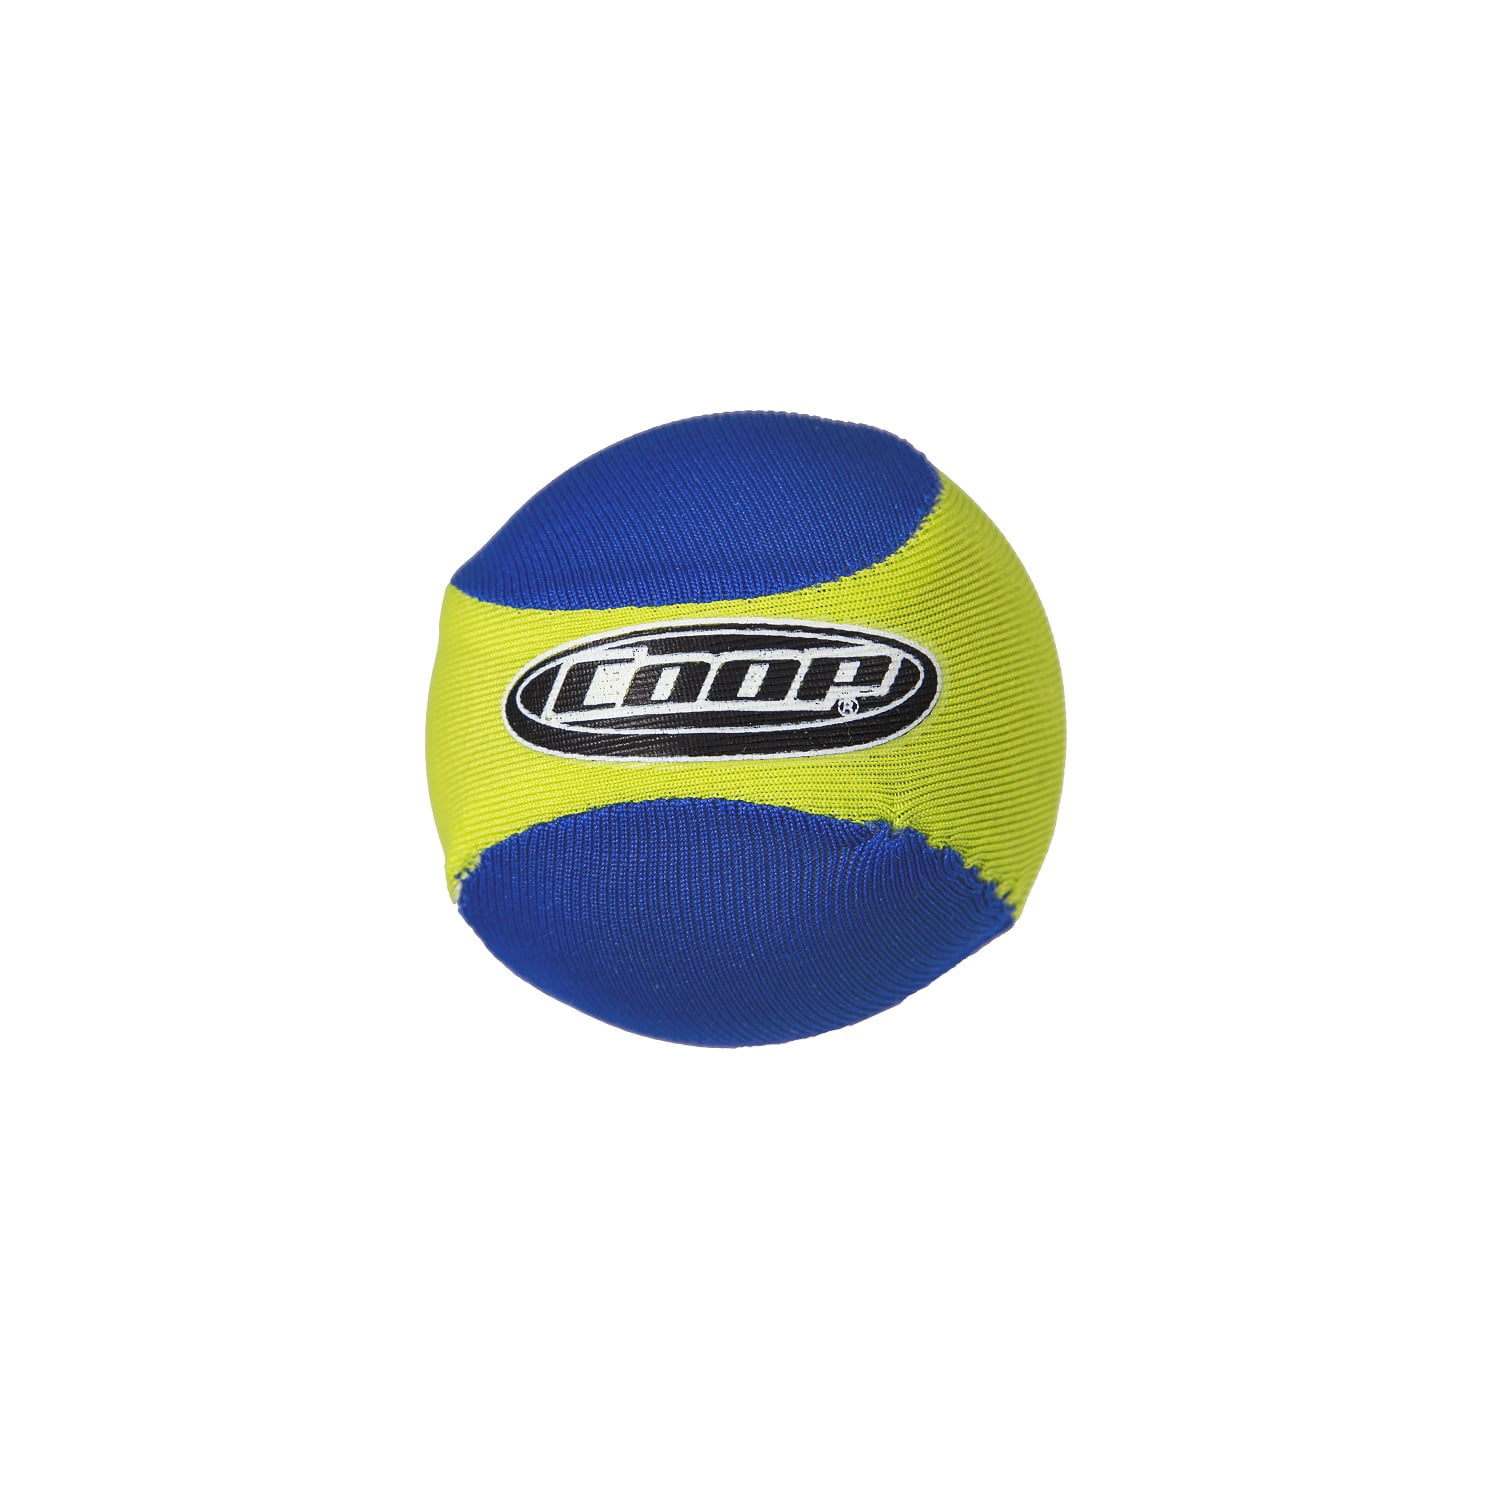 LOTS OF FUN. Details about   DUNK 'N DRENCH POOL AND BEACH SPLASH BALLS SET OF 10 BALLS 